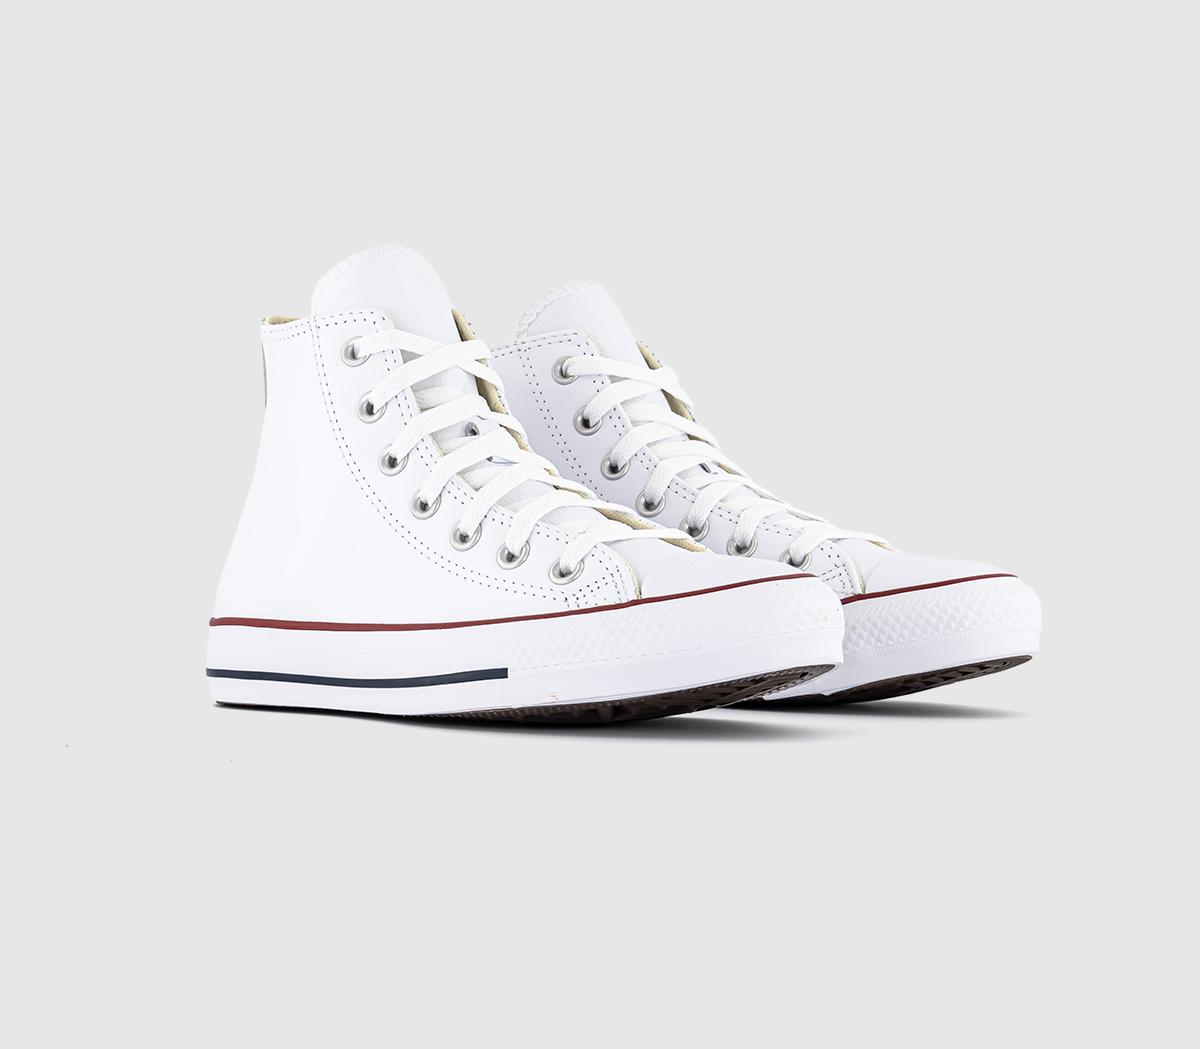 Converse All Star High White Leather Classic Trainers, 10